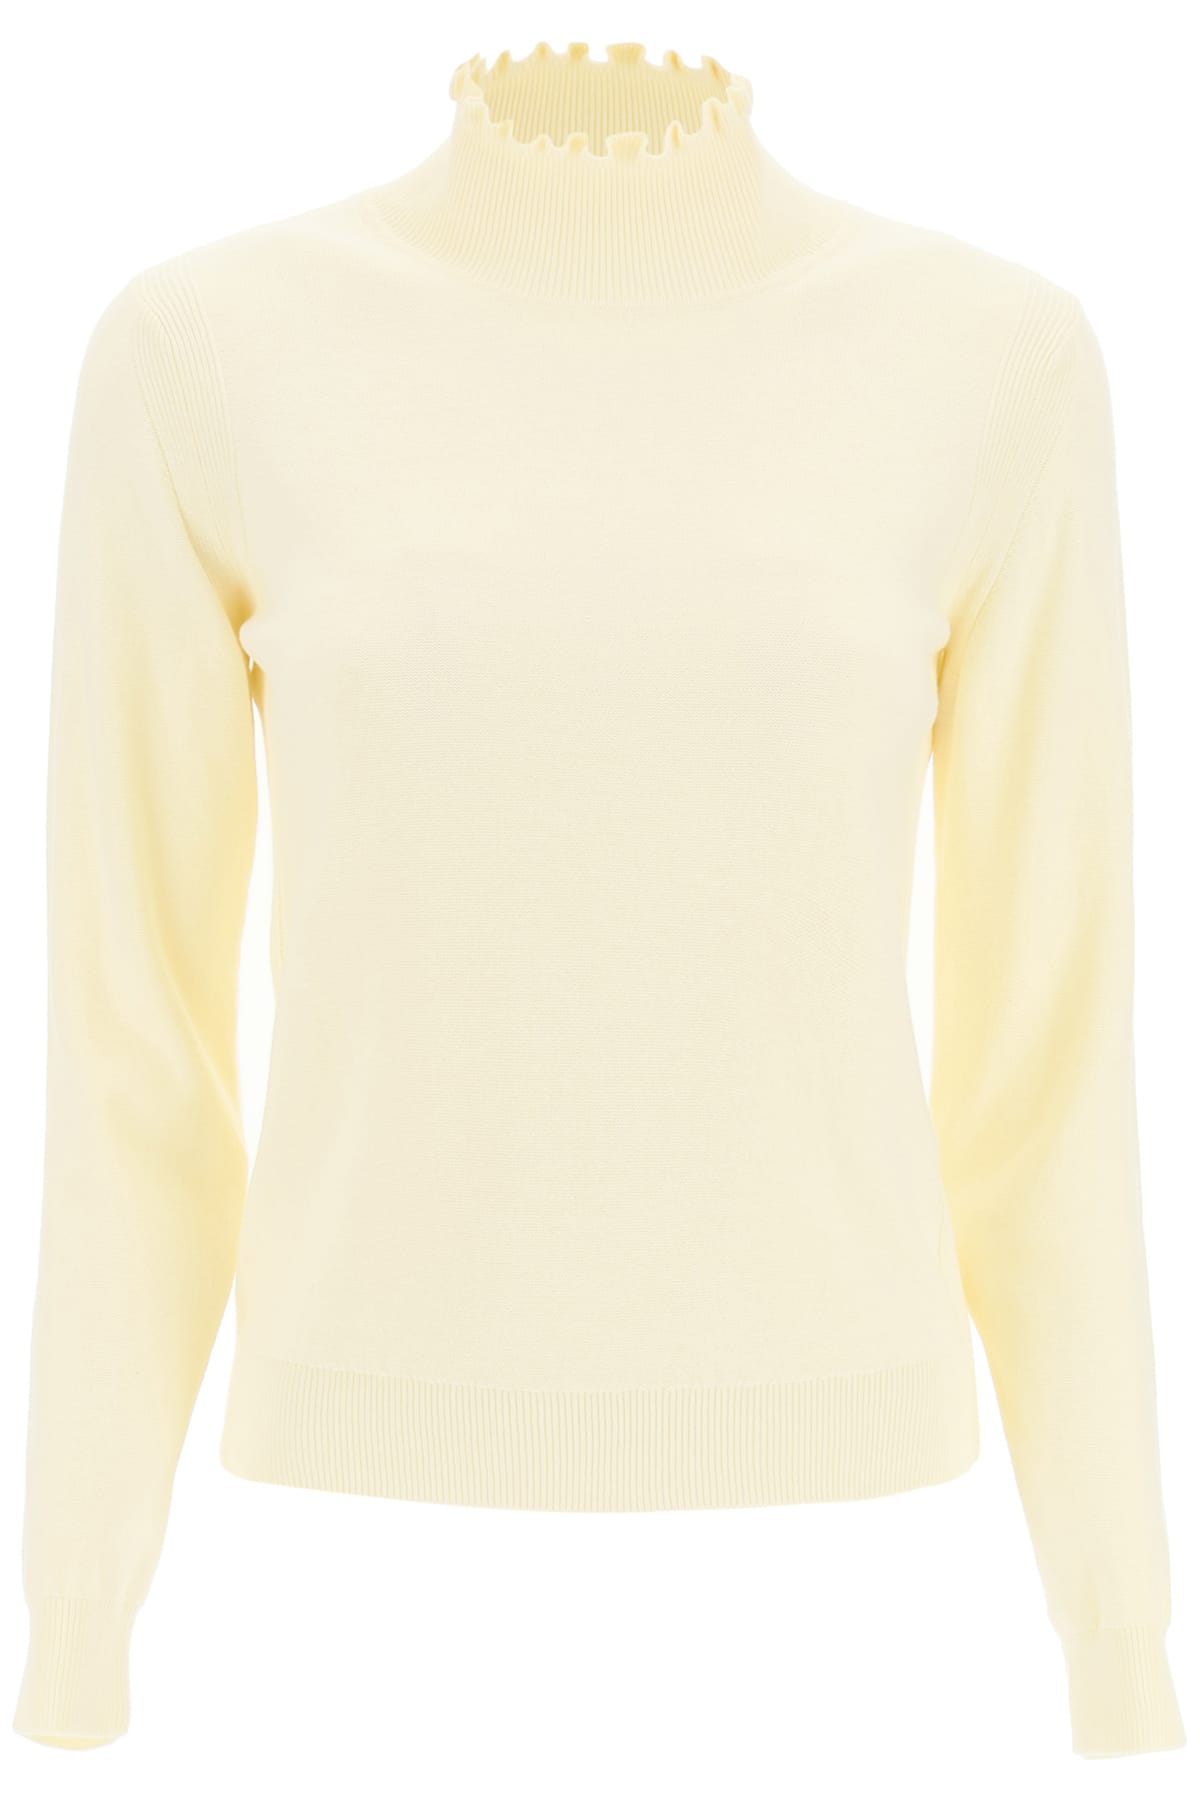 See by Chloé Ruched Neck Sweater